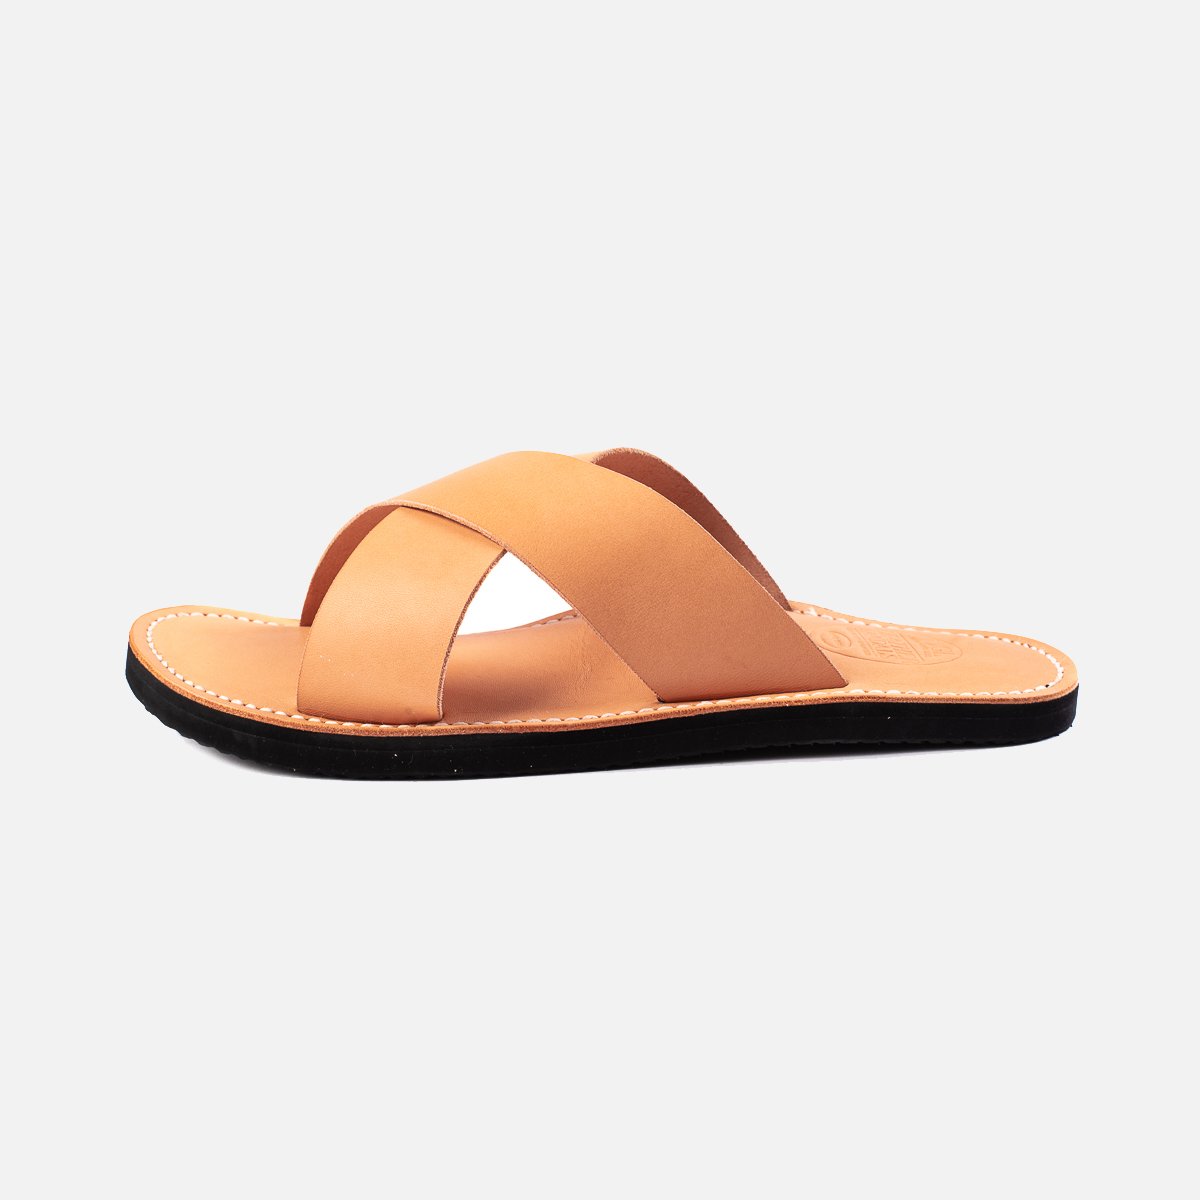 Obbi Good Label X Dr Sole Leather Cross Sandals in Natural